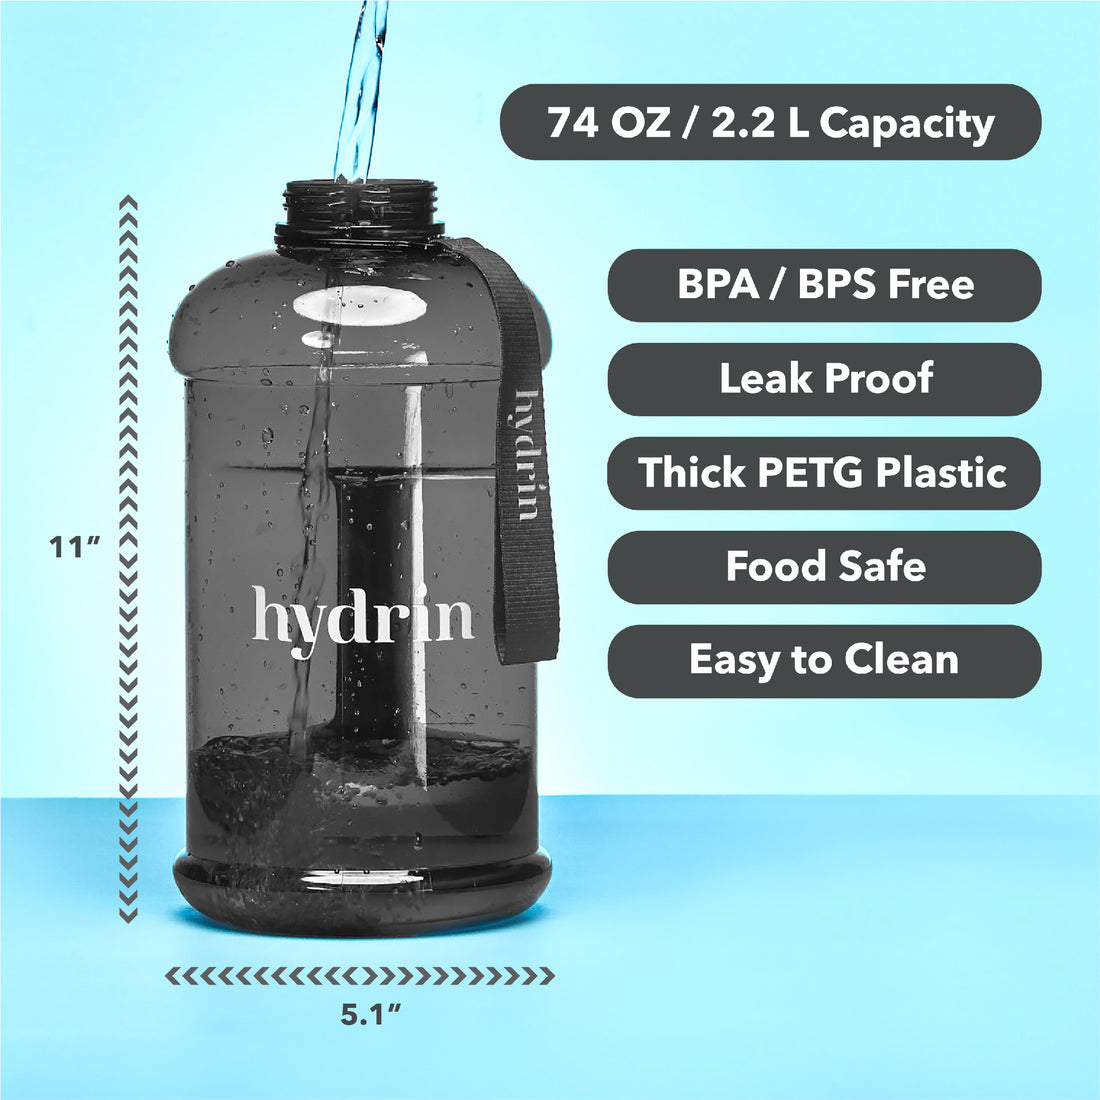 Hydrate XL Jug Half Gallon Water Bottle - BPA Free, Flip Cap, Ideal for Gym - Color